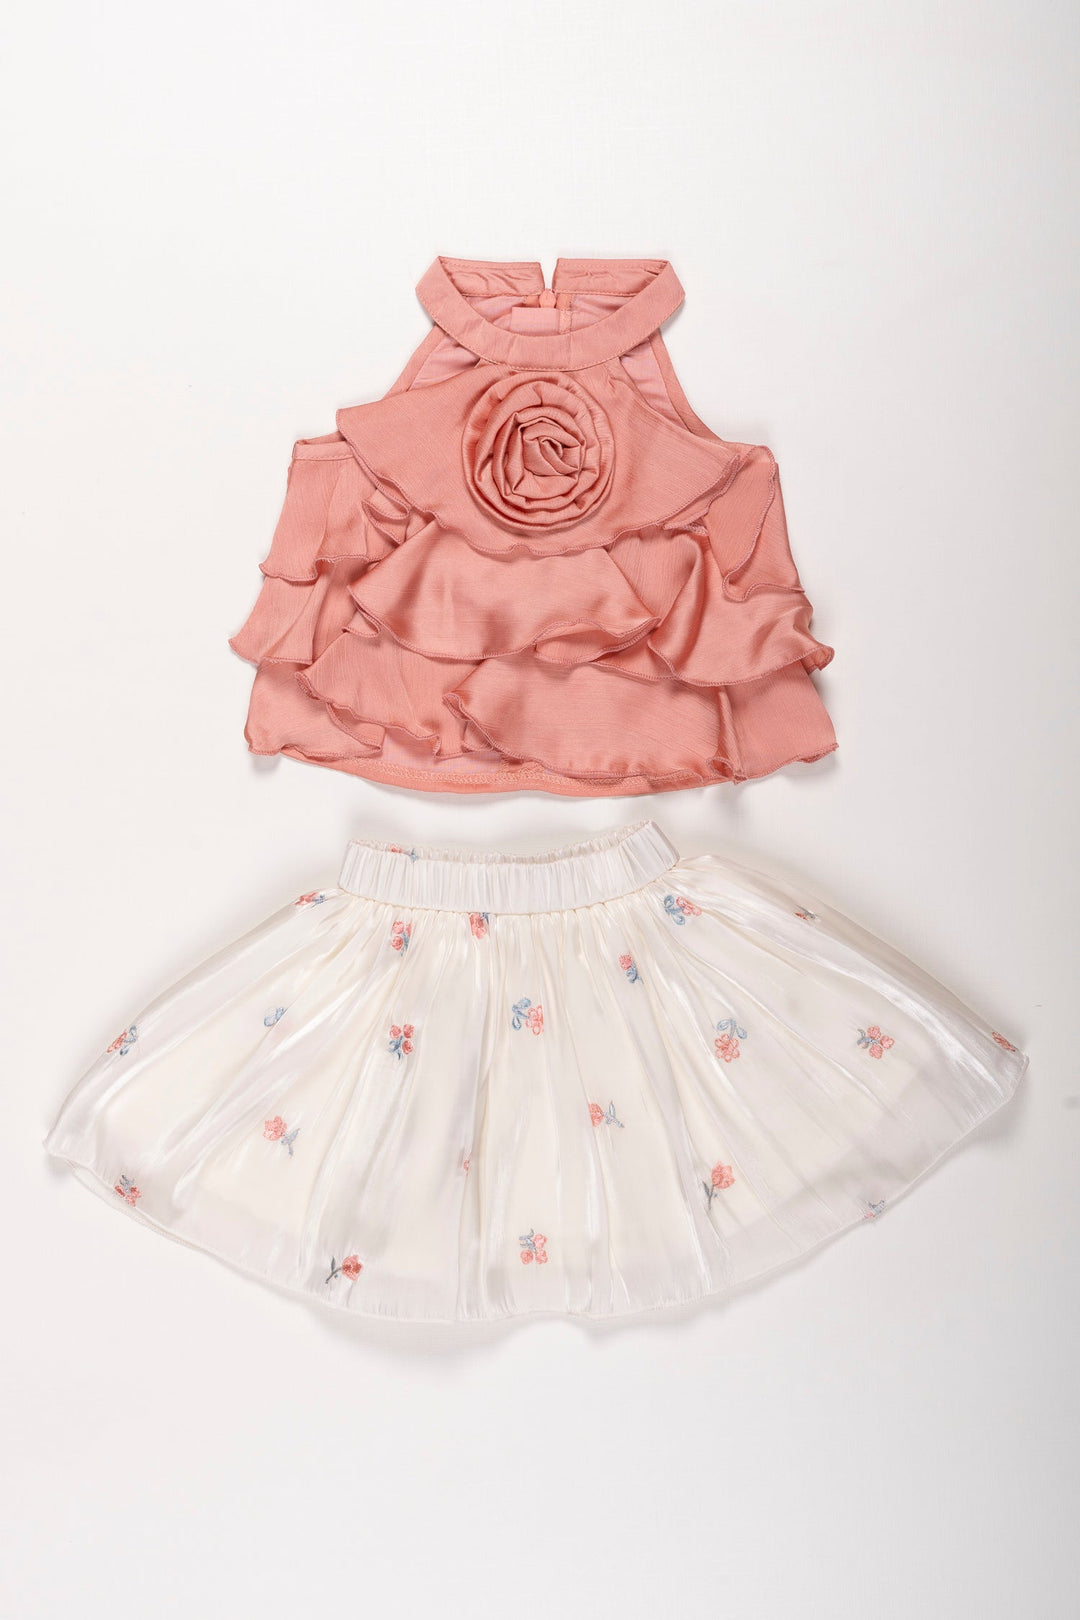 The Nesavu Baby Casual Sets Girls Petal Pink Cascade Halter and Starlit Tulle Skirt Ensemble Nesavu 18 (2Y) / Pink BFJ516B-18 Petal Pink Ruffle Halter & Sparkling Tulle Ensemble for Girls | Chic Party Attire | The Nesavu